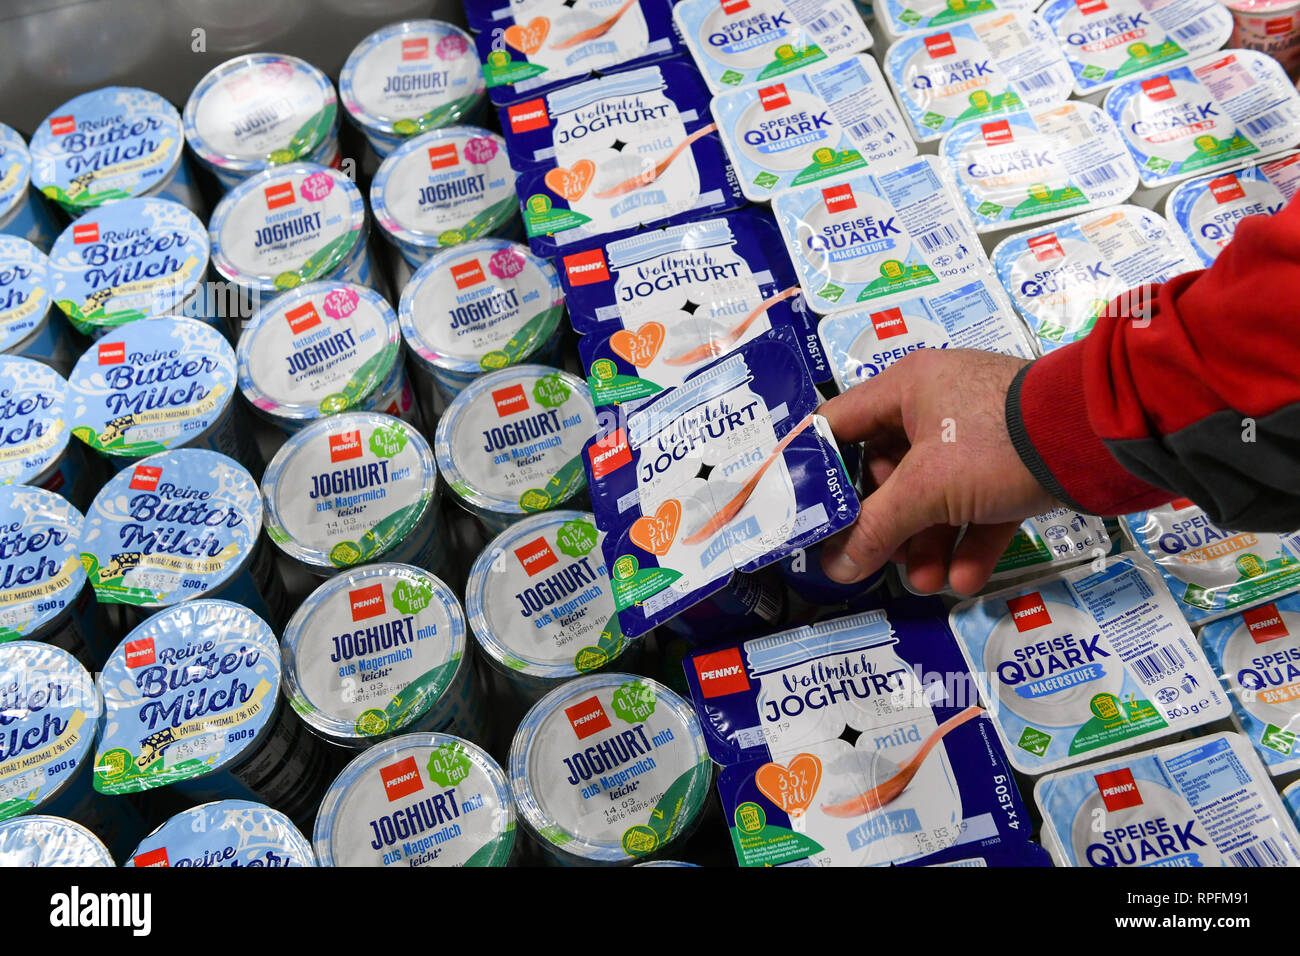 22 February 2019, Berlin: An employee arranges the dairy products in a freezer cabinet at the Penny grocery discounter. Today, the Germany-wide campaign 'Save precious things' was launched, the aim of which is to reduce food waste. The minimum shelf life date is often understood as a disposable date, but many products can be enjoyed for even longer. Photo: Jens Kalaene/dpa Stock Photo